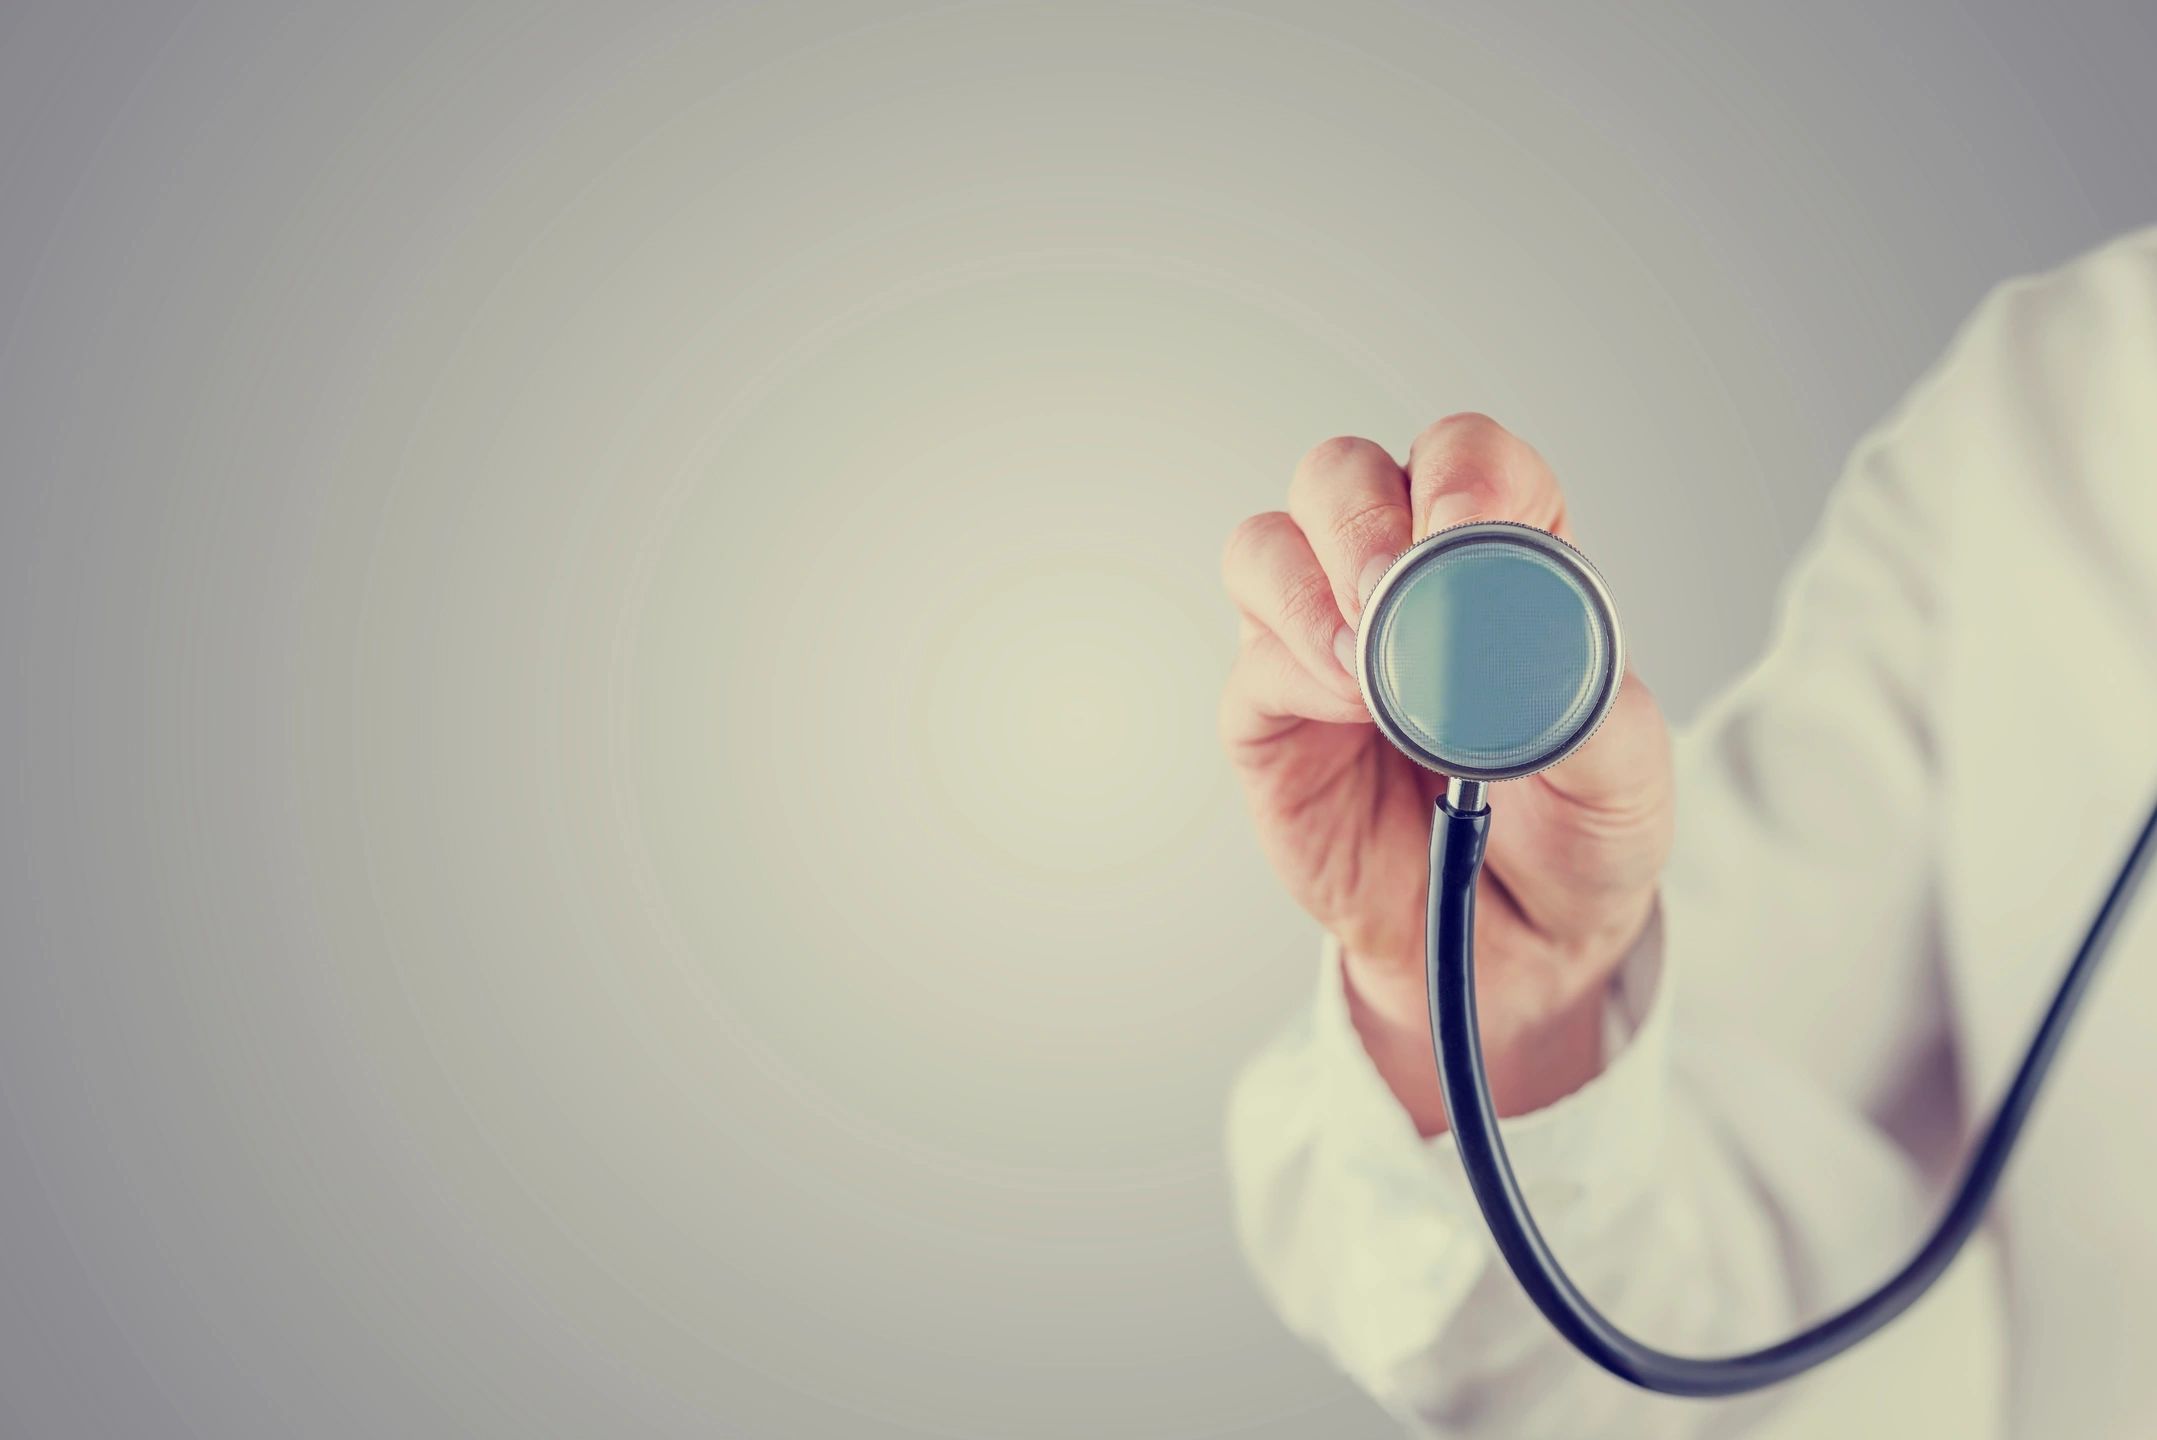 stethoscope held up by doctor in white coat